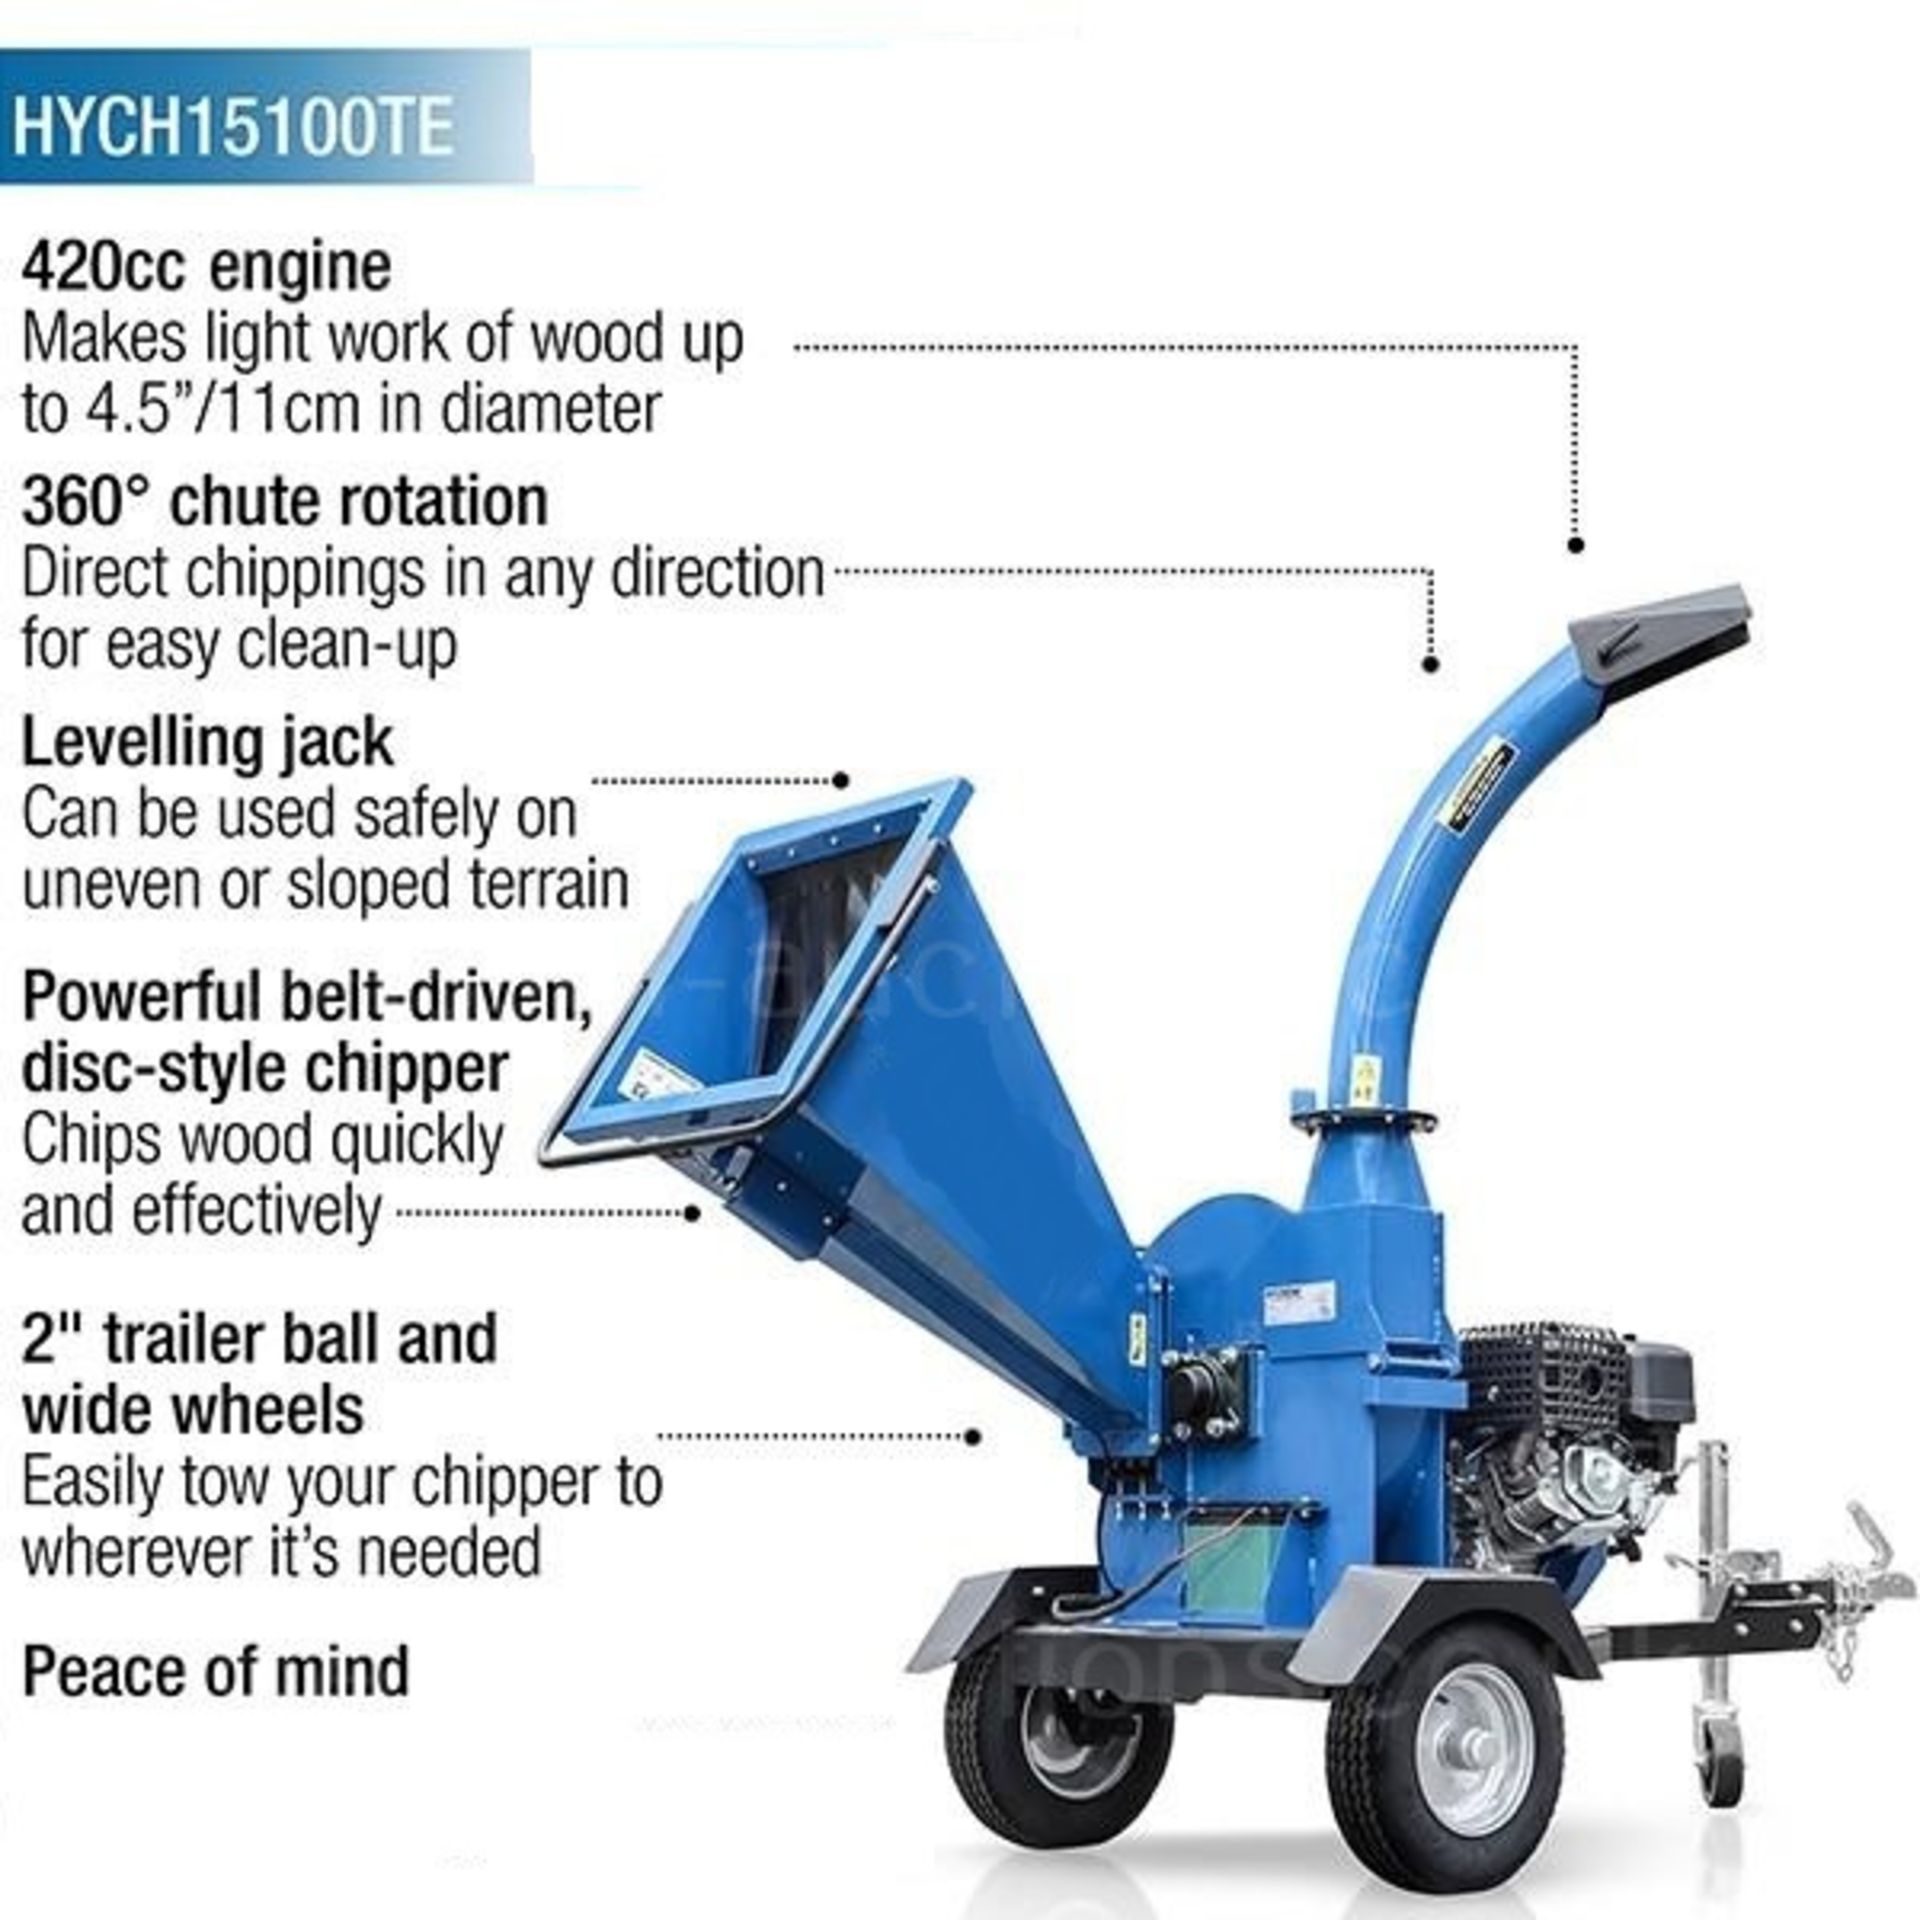 NEW AND UNUSED 15100TE 420cc 4.5" TOWABLE PETROL WOOD CHIPPER, RRP OVER £2400 *PLUS VAT* - Image 6 of 10